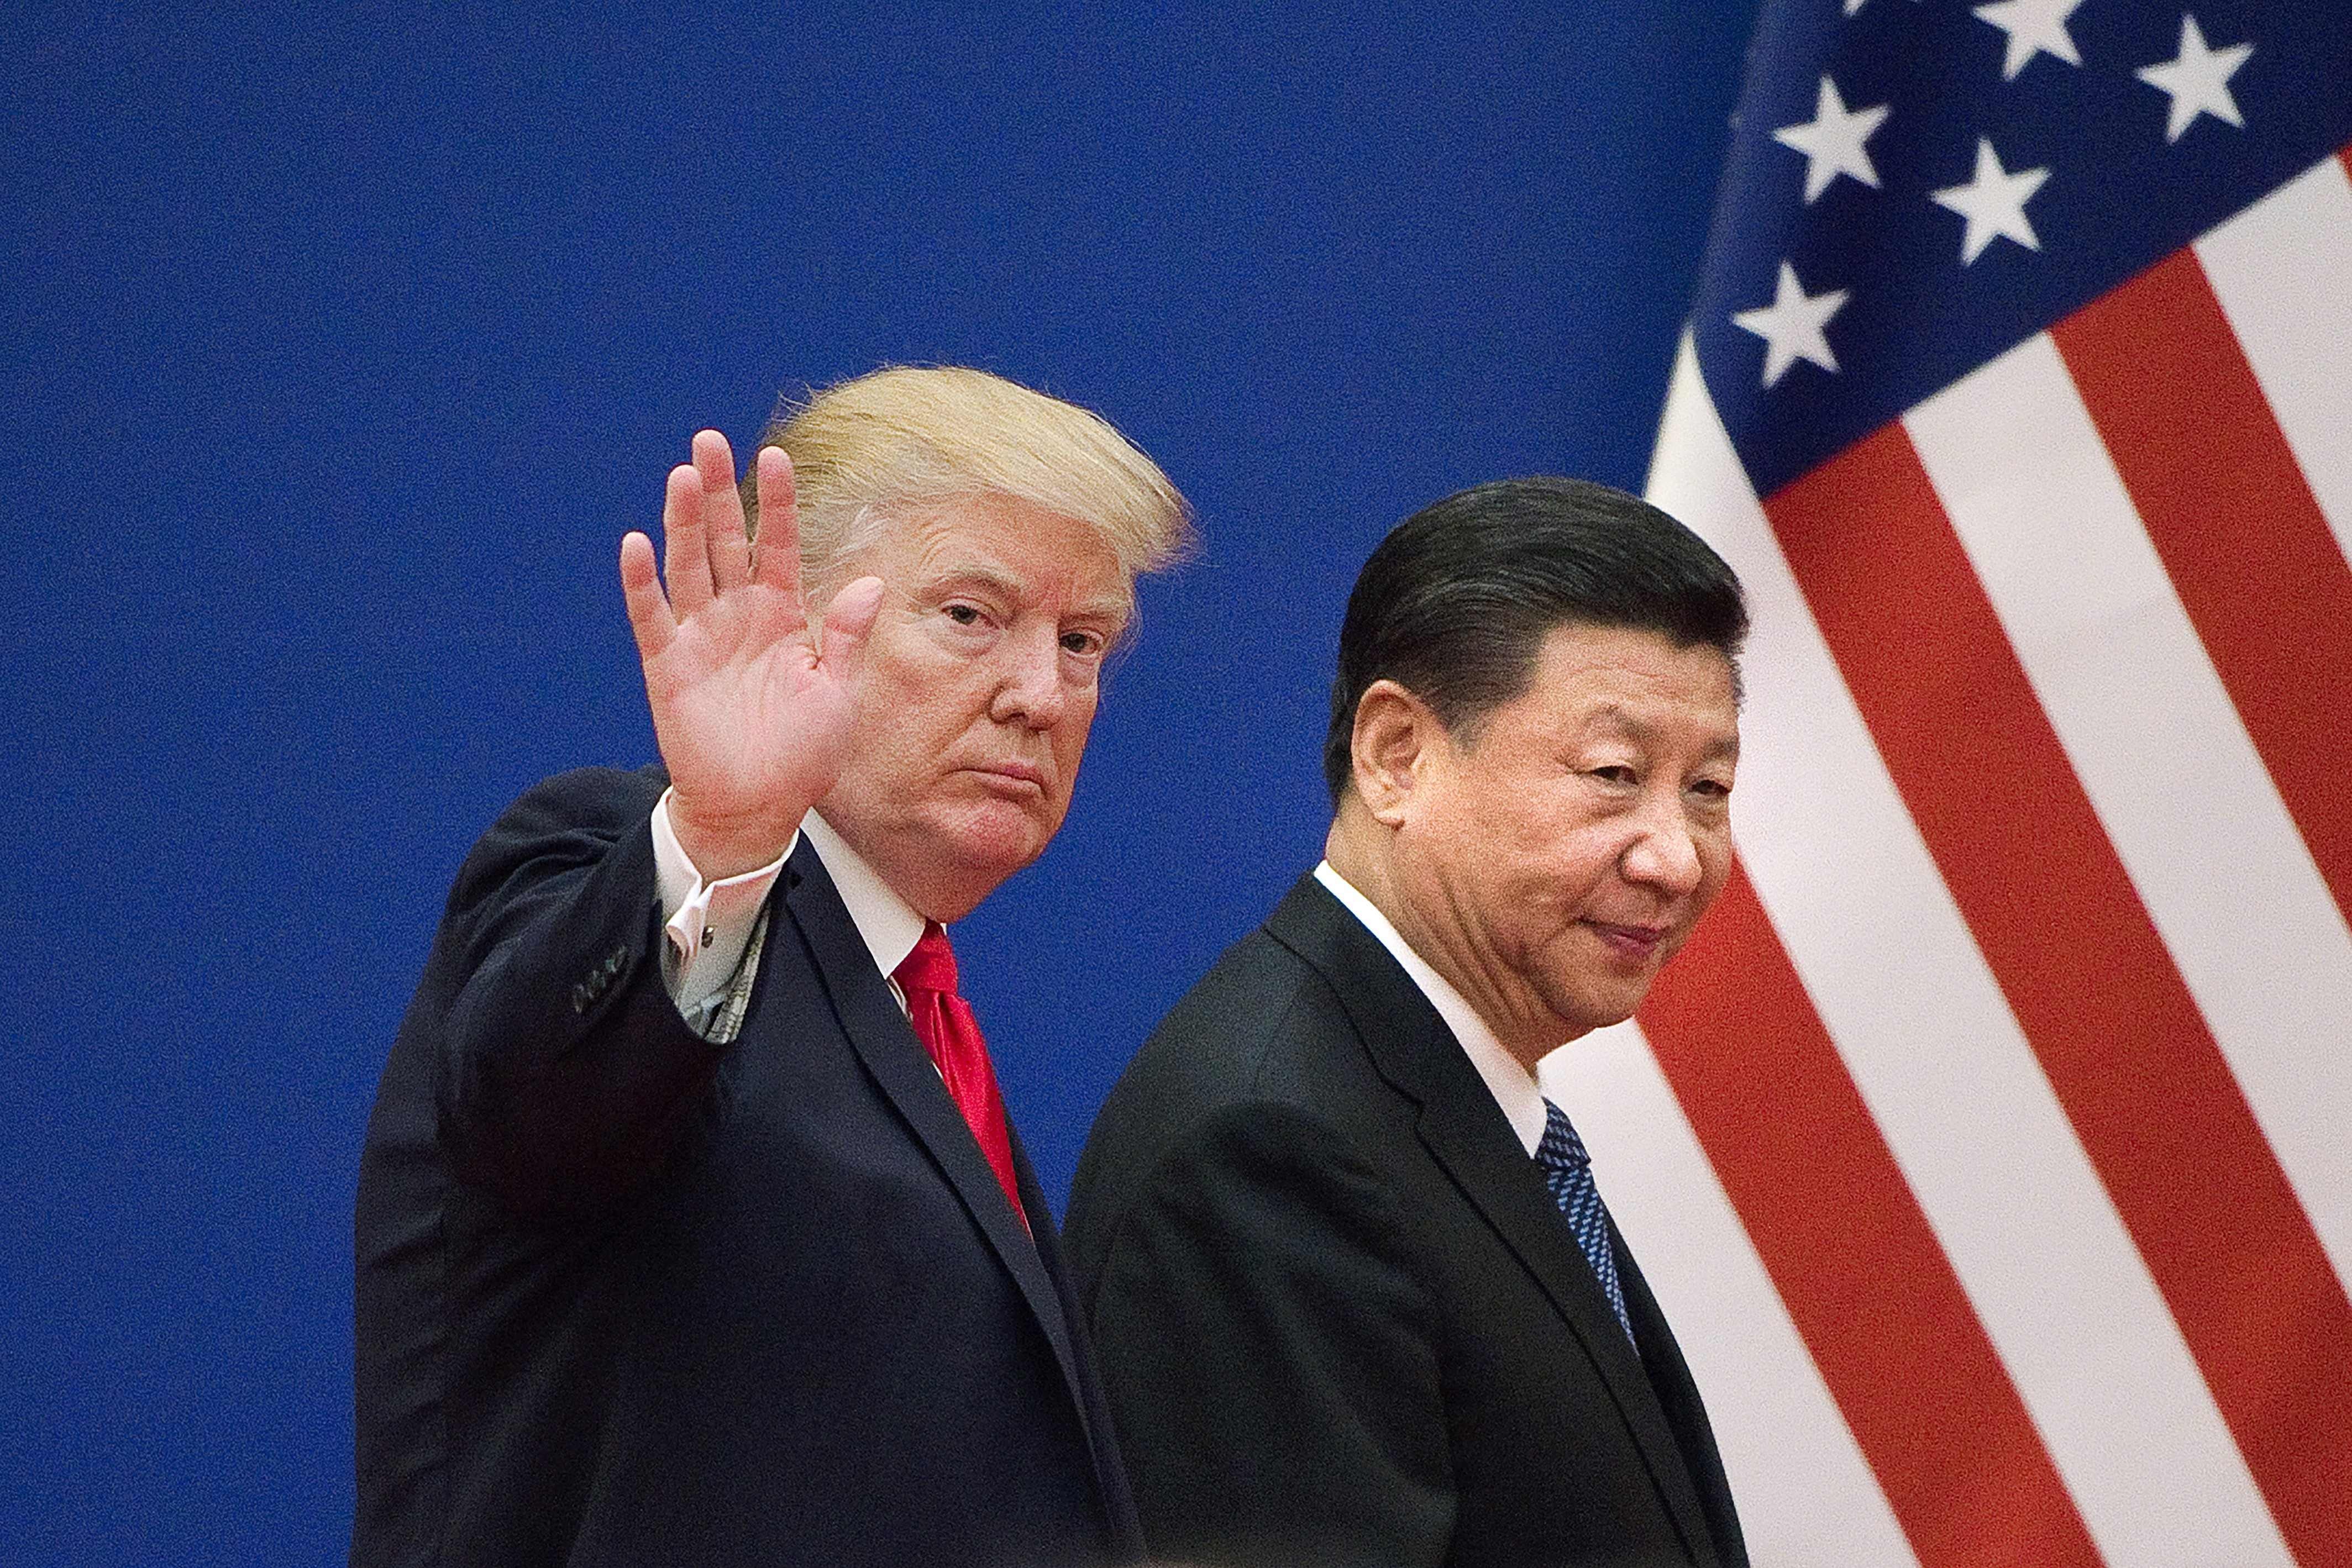 This file picture taken on November 9, 2017, shows US President Donald Trump (left) and China's President Xi Jinping leaving a business leaders event at the Great Hall of the People in Beijing. Photo: Agence France-Presse